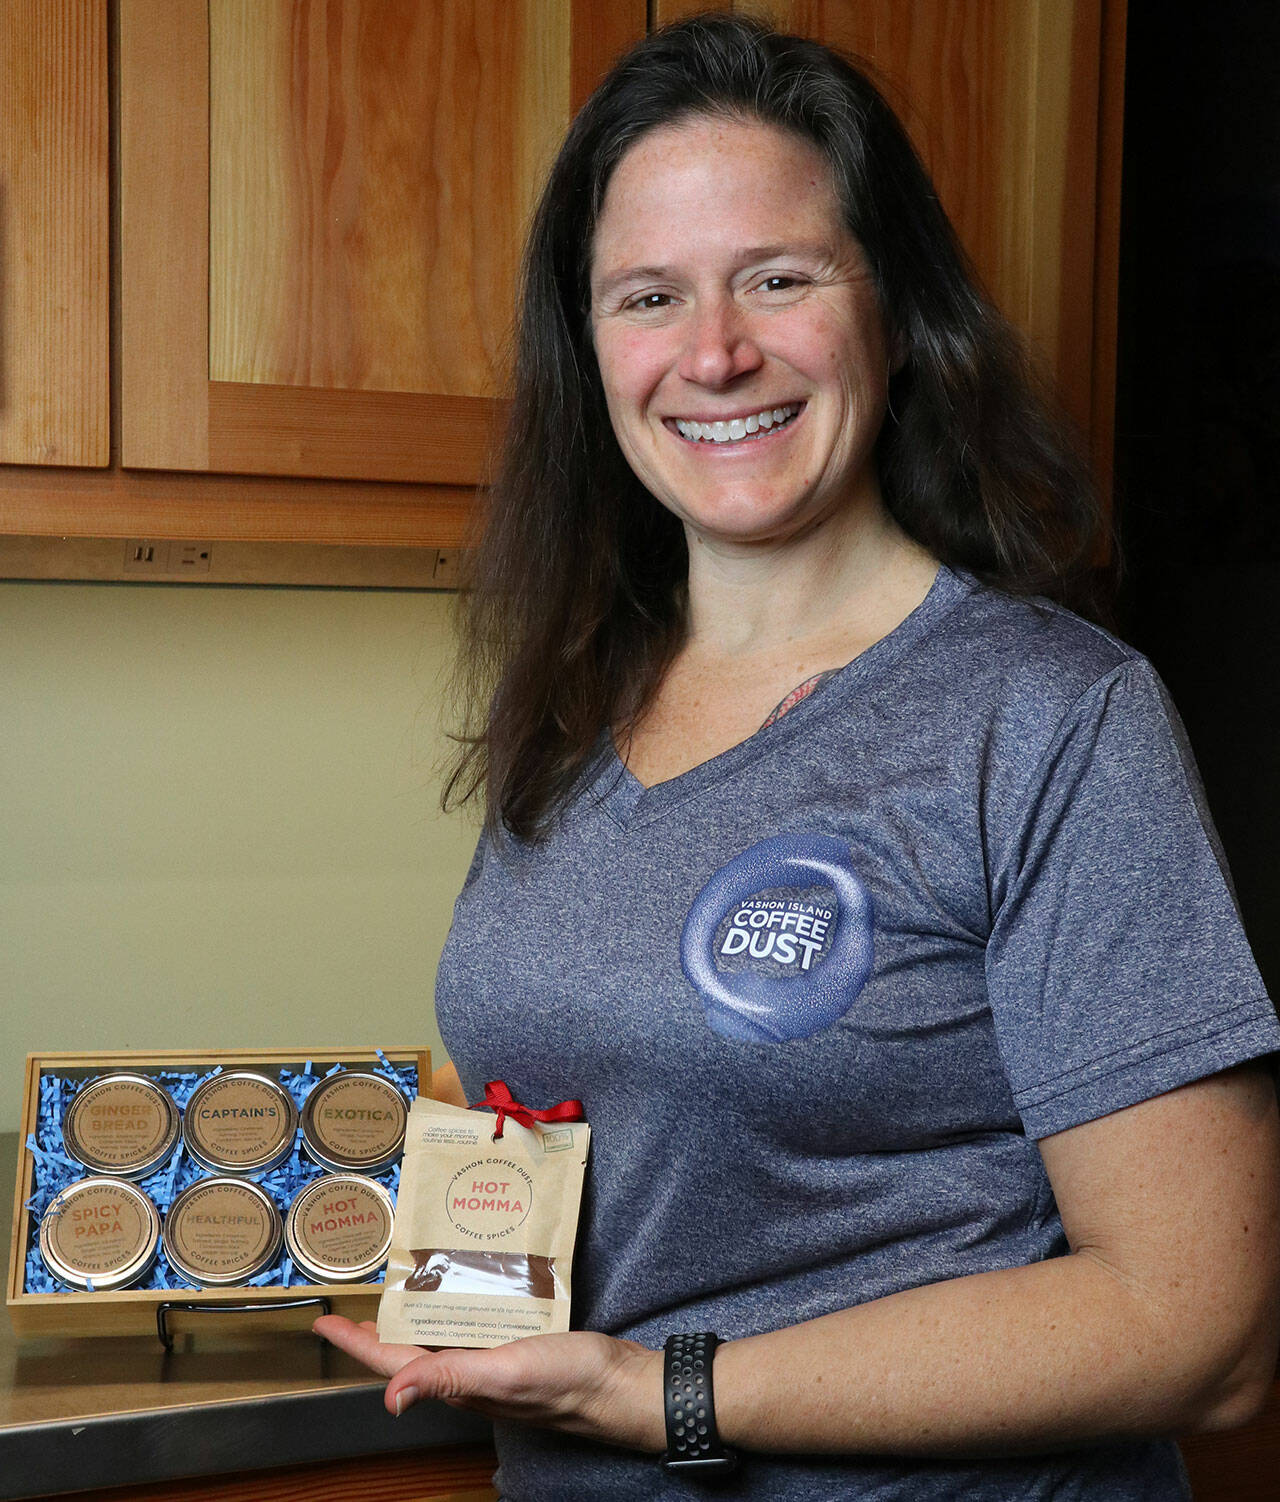 (Photo Courtesy Christy Clement) Christy Clement, owner of Vashon Island Coffee Dust, with the current spice blends made by her company.